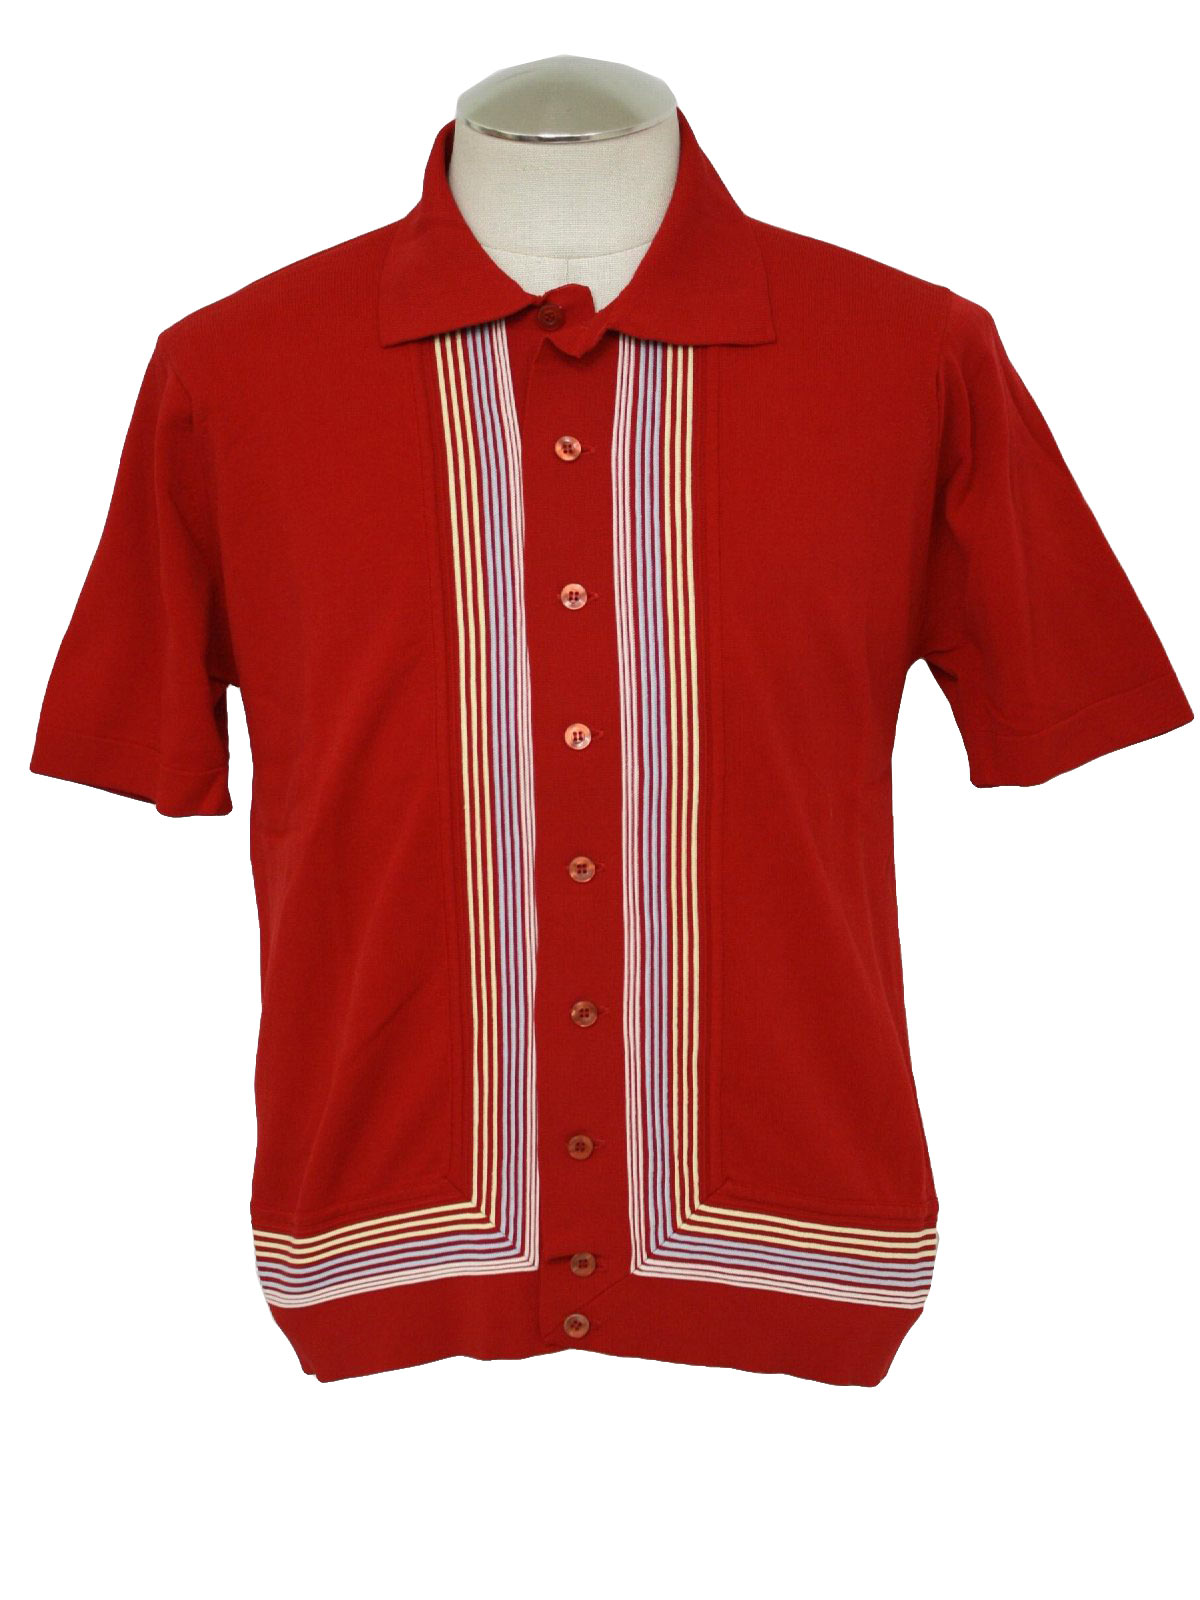 Vintage 1960's Knit Shirt: 60s -Missing Label- Mens cherry red ...